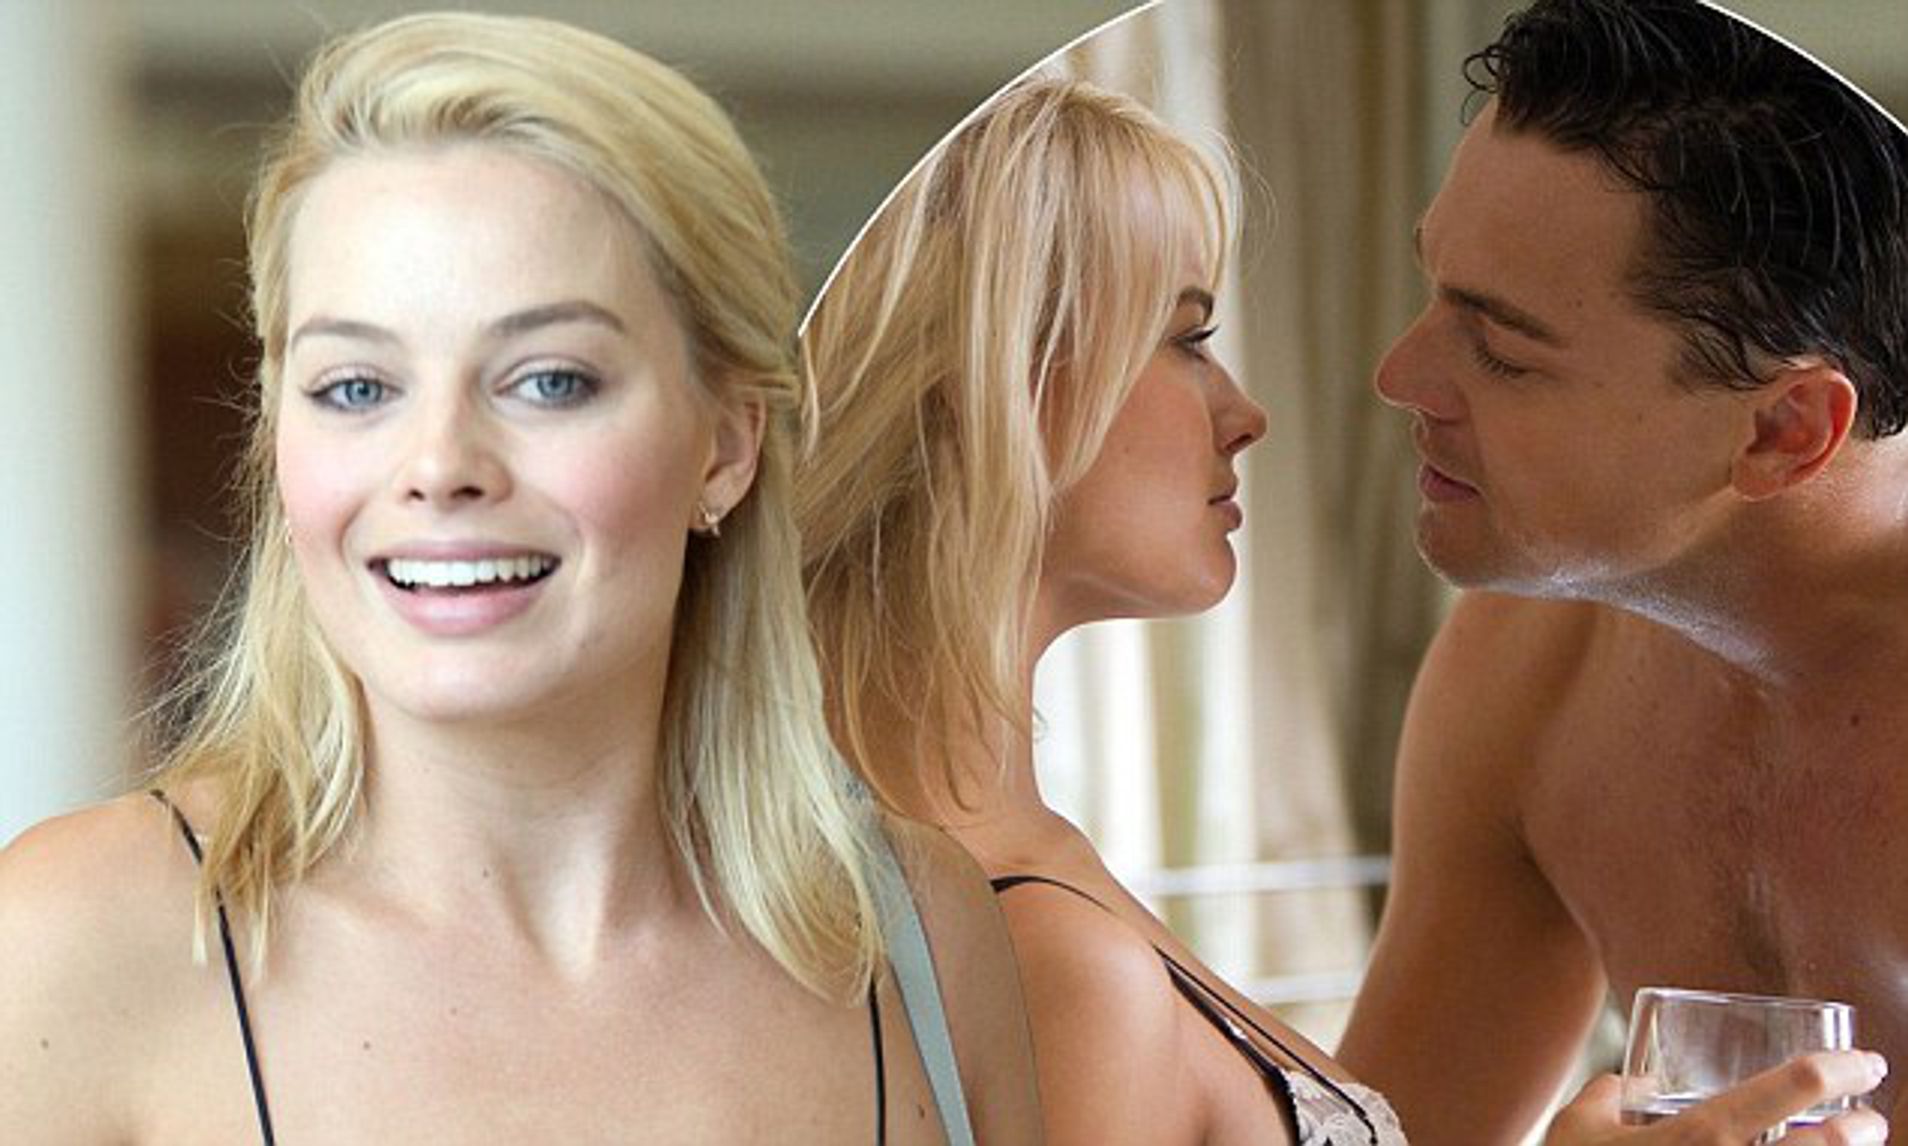 dina gomaa recommends margot robbie wolf of wall street body pic